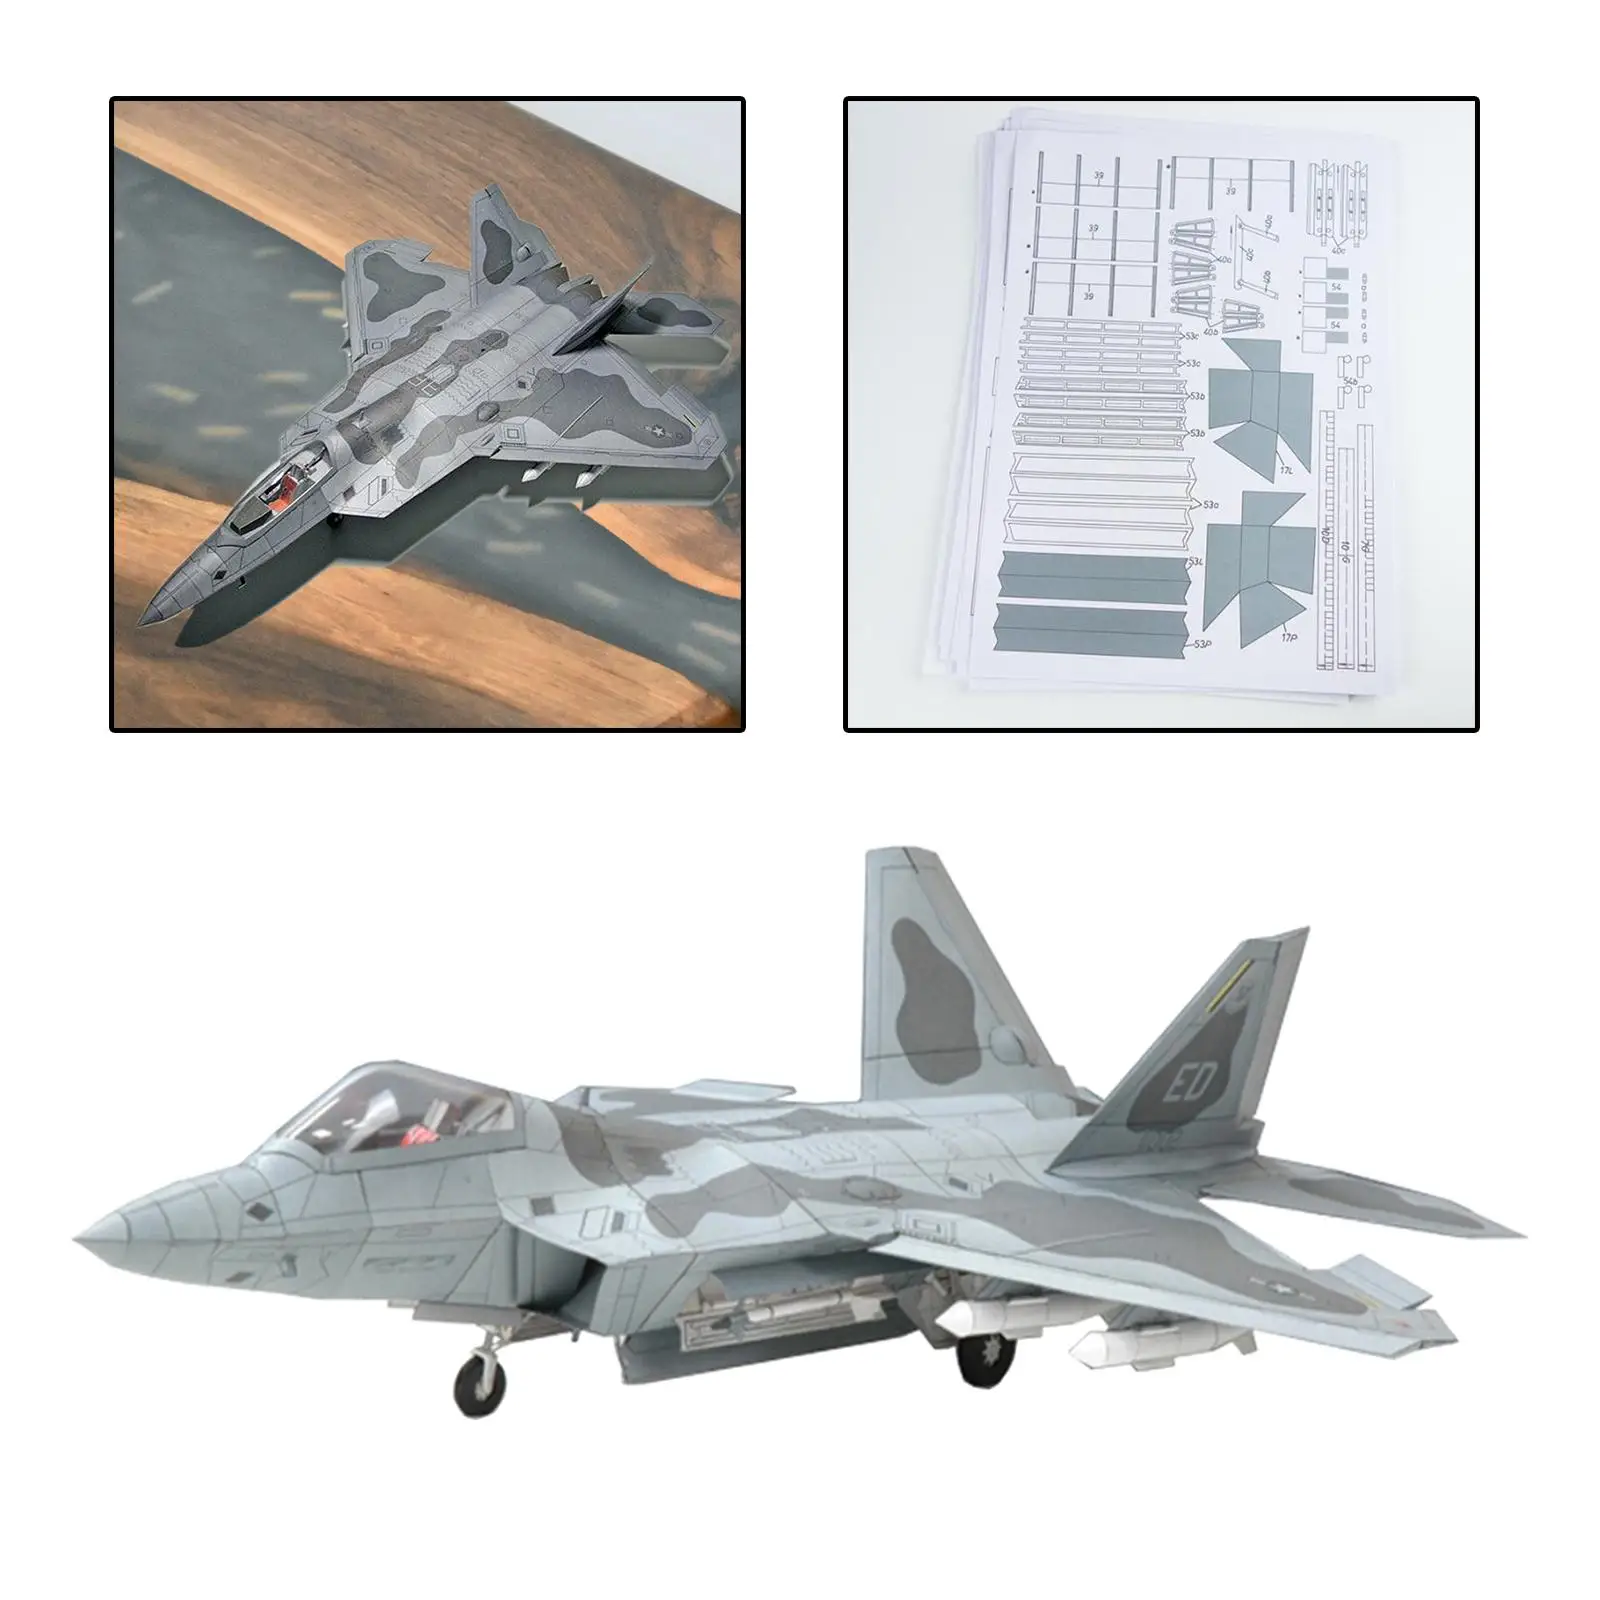 1/33 3D F22 Fighter Assemble Paper Model Kit Papercraft Building DIY Toys Education Toys for Adults Kids Boys Collectables Gifts